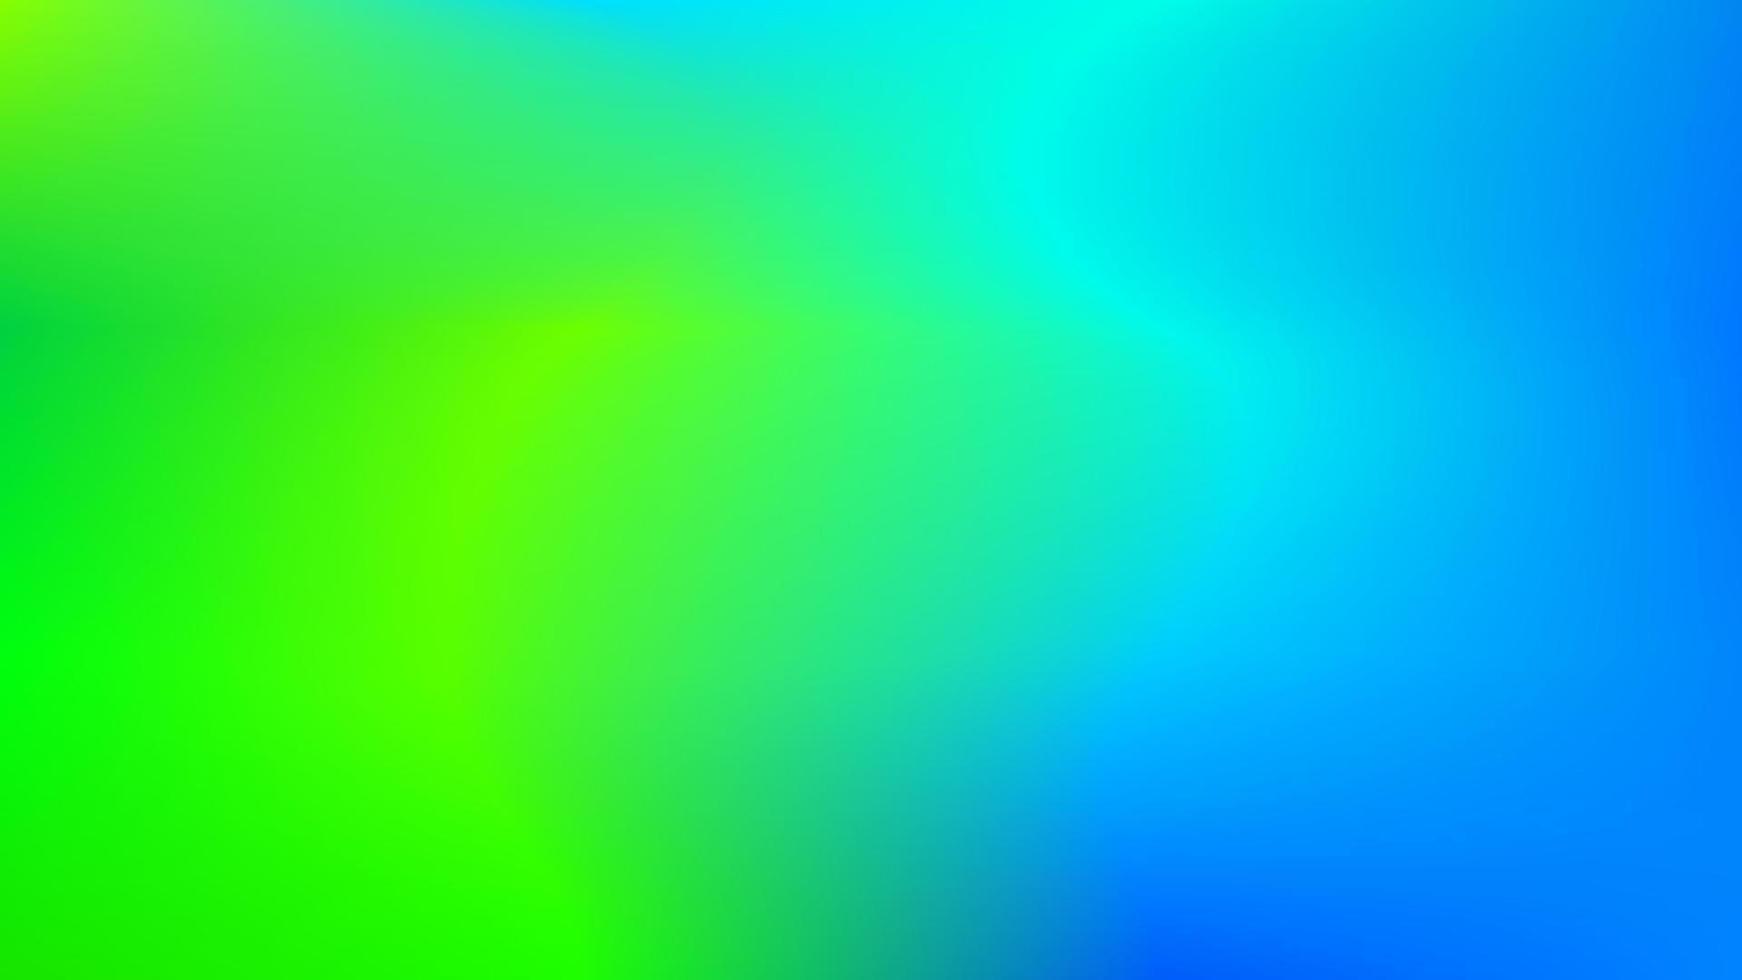 abstract gradient background with green and blue colors. gradient backgrounds for wallpapers, posters, flyers, business cards, banners and landing pages. vector